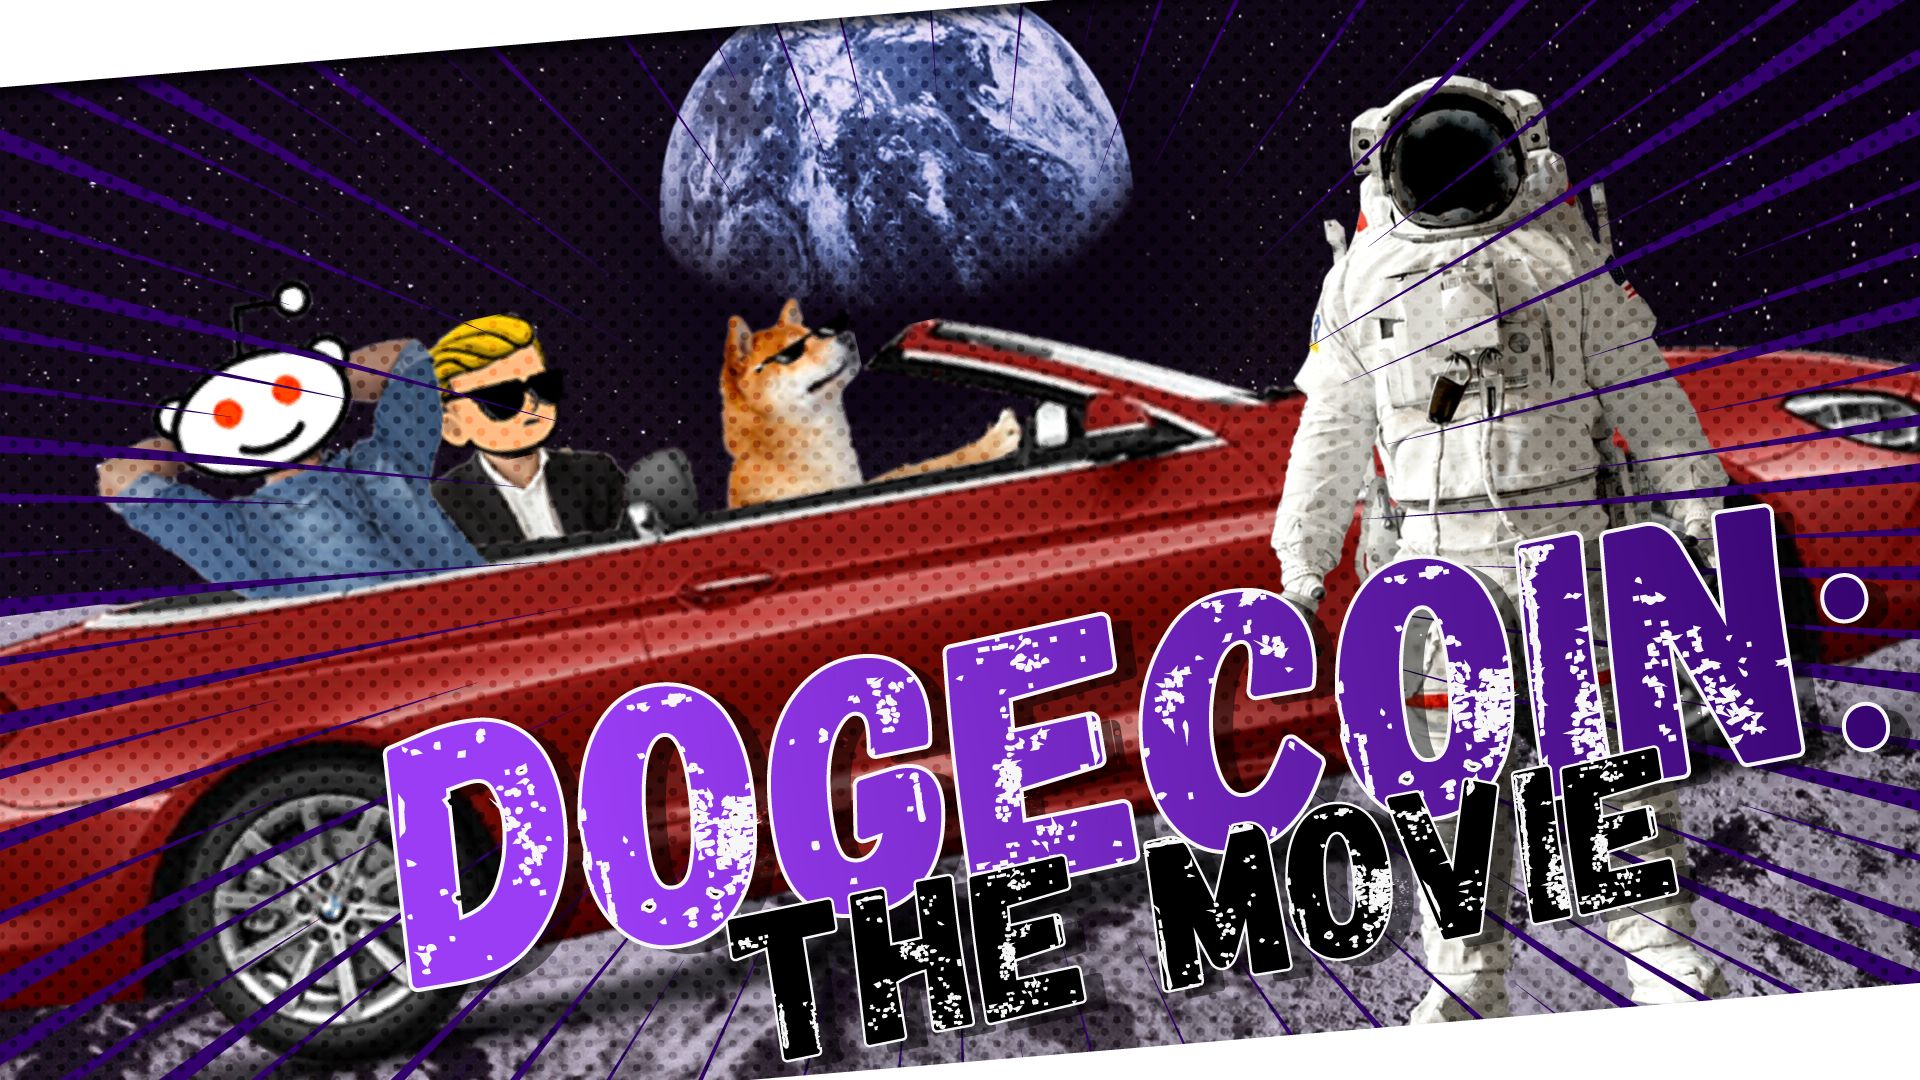 Article Dogecoin Movie is here!